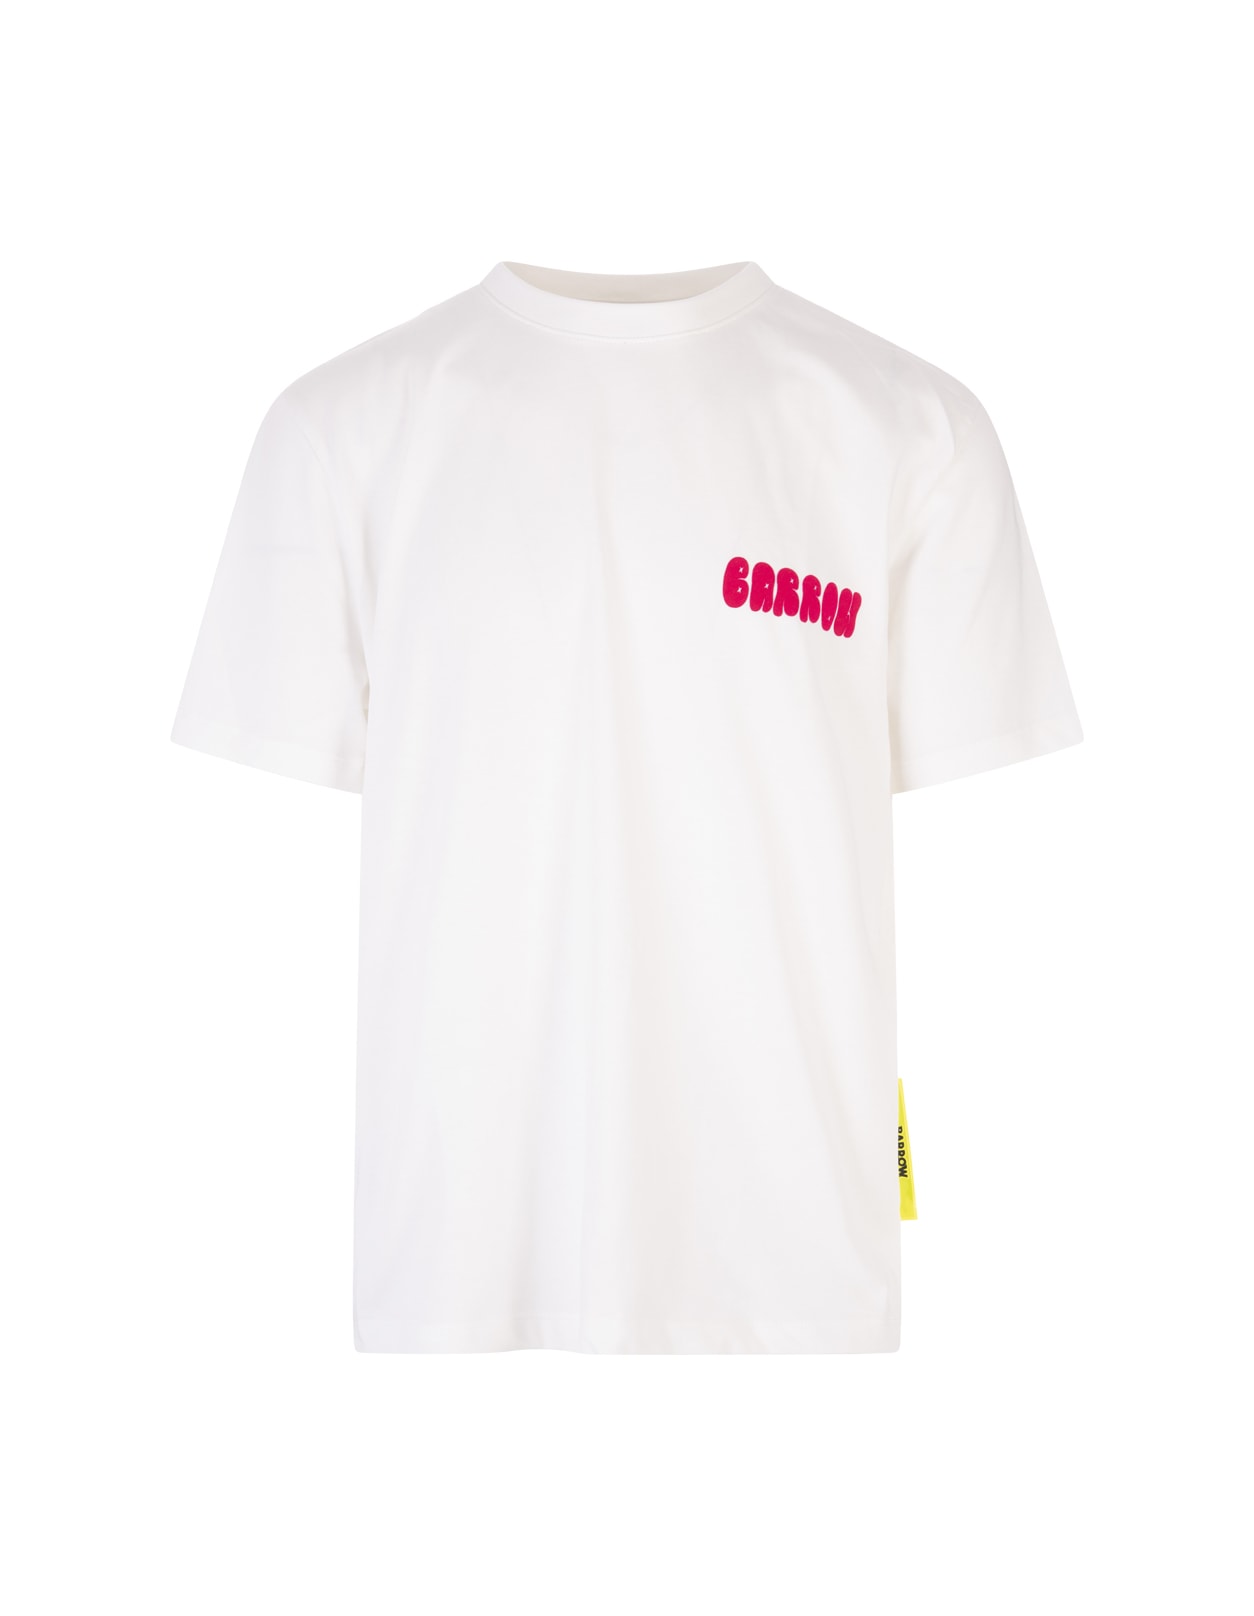 Barrow Unisex White T-shirt With Print Decorated With Rhinestones And Sequins